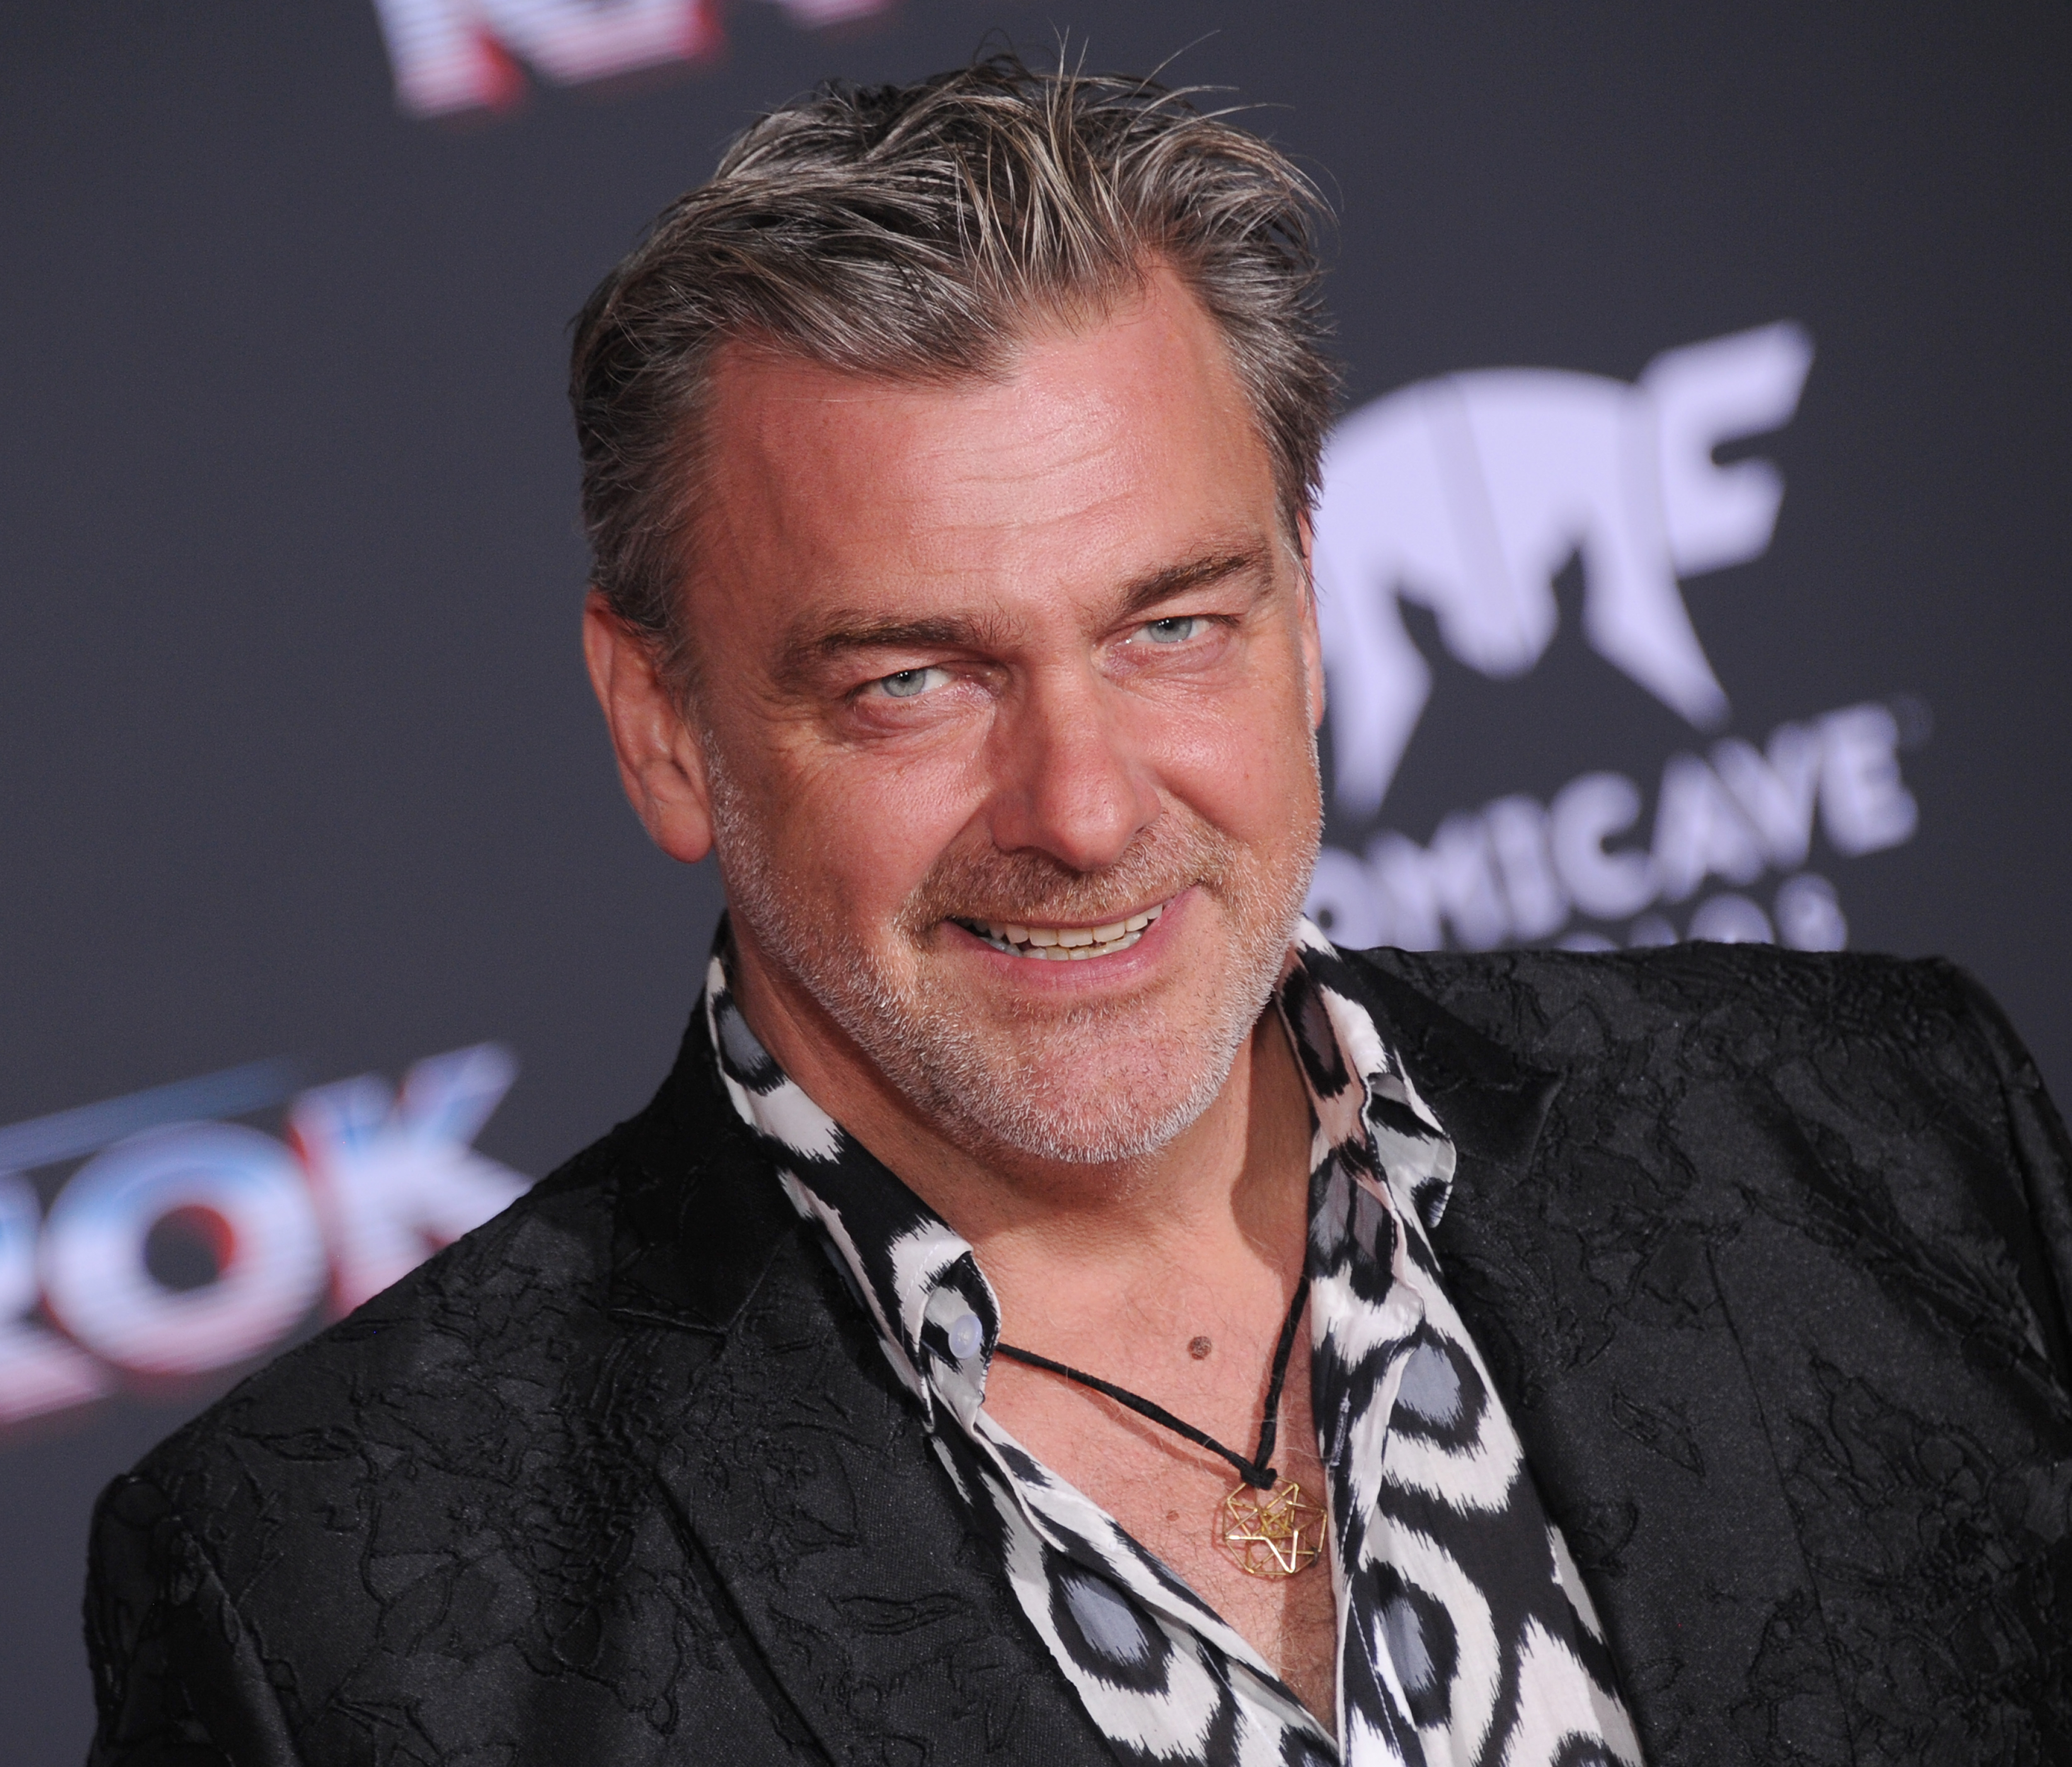 Ray Stevenson at the premiere of Disney and Marvel's "Thor: Ragnarok" at the El Capitan Theatre, on October 10, 2017, in Los Angeles, California. | Source: Getty Images